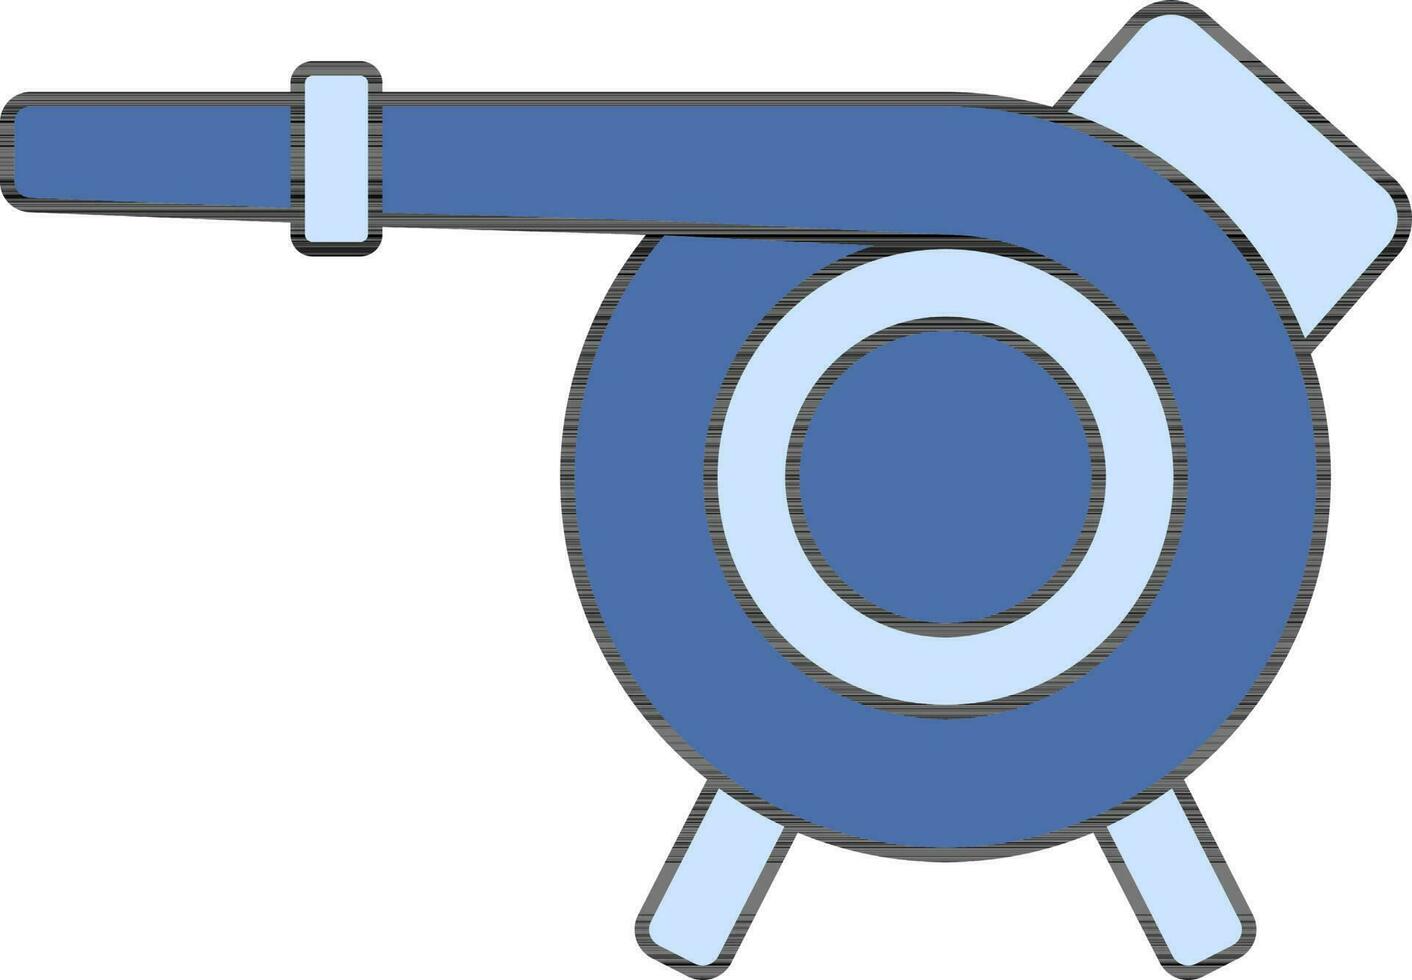 Blower Icon Or Symbol In Blue Color. vector